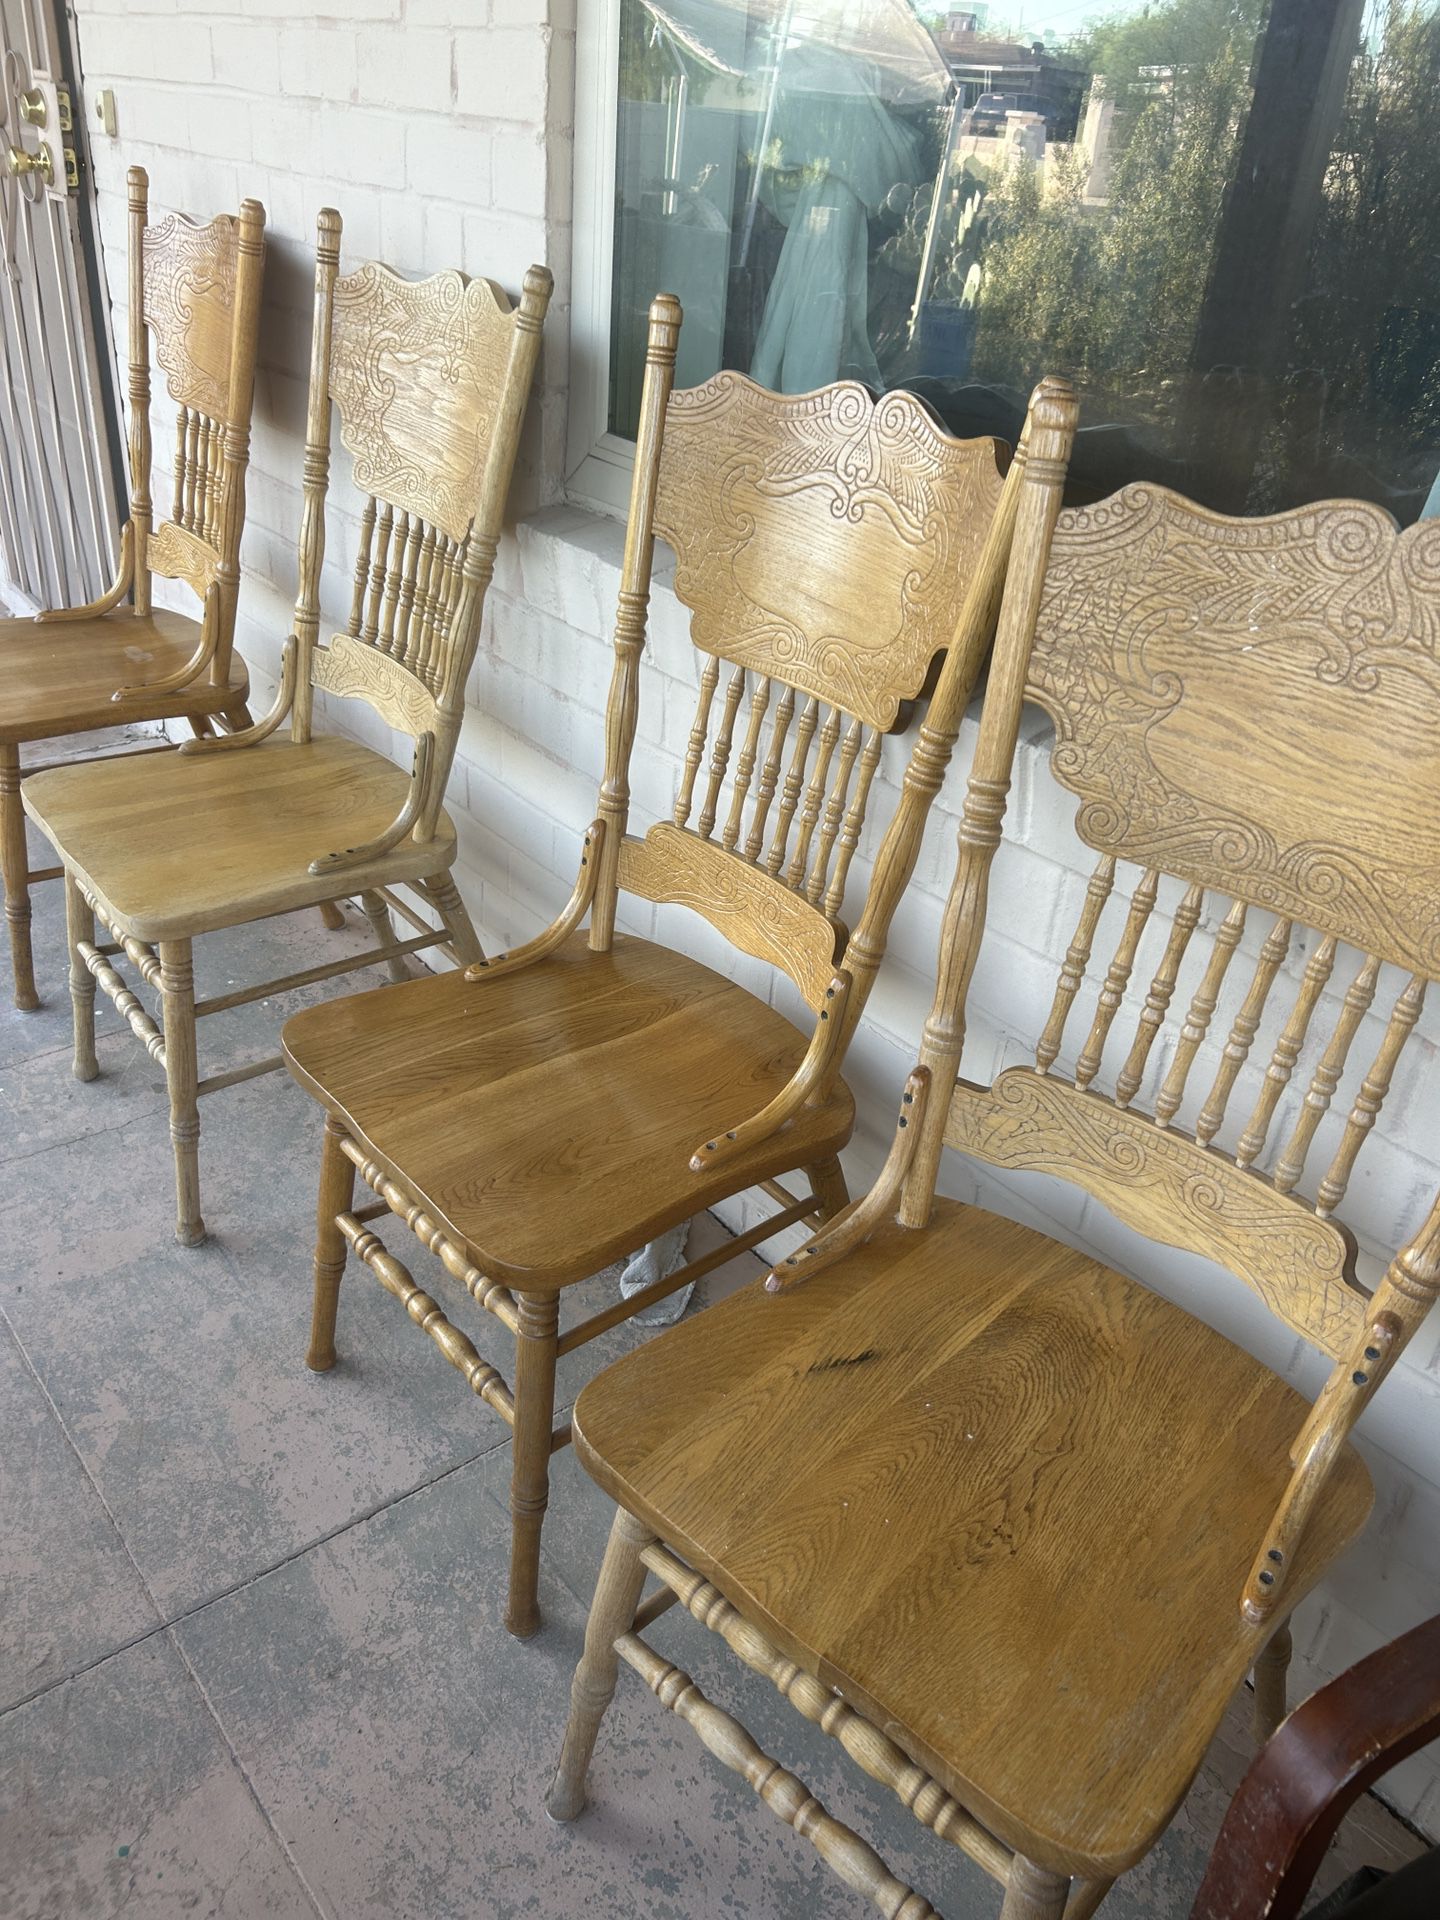 Wooden Chairs $40